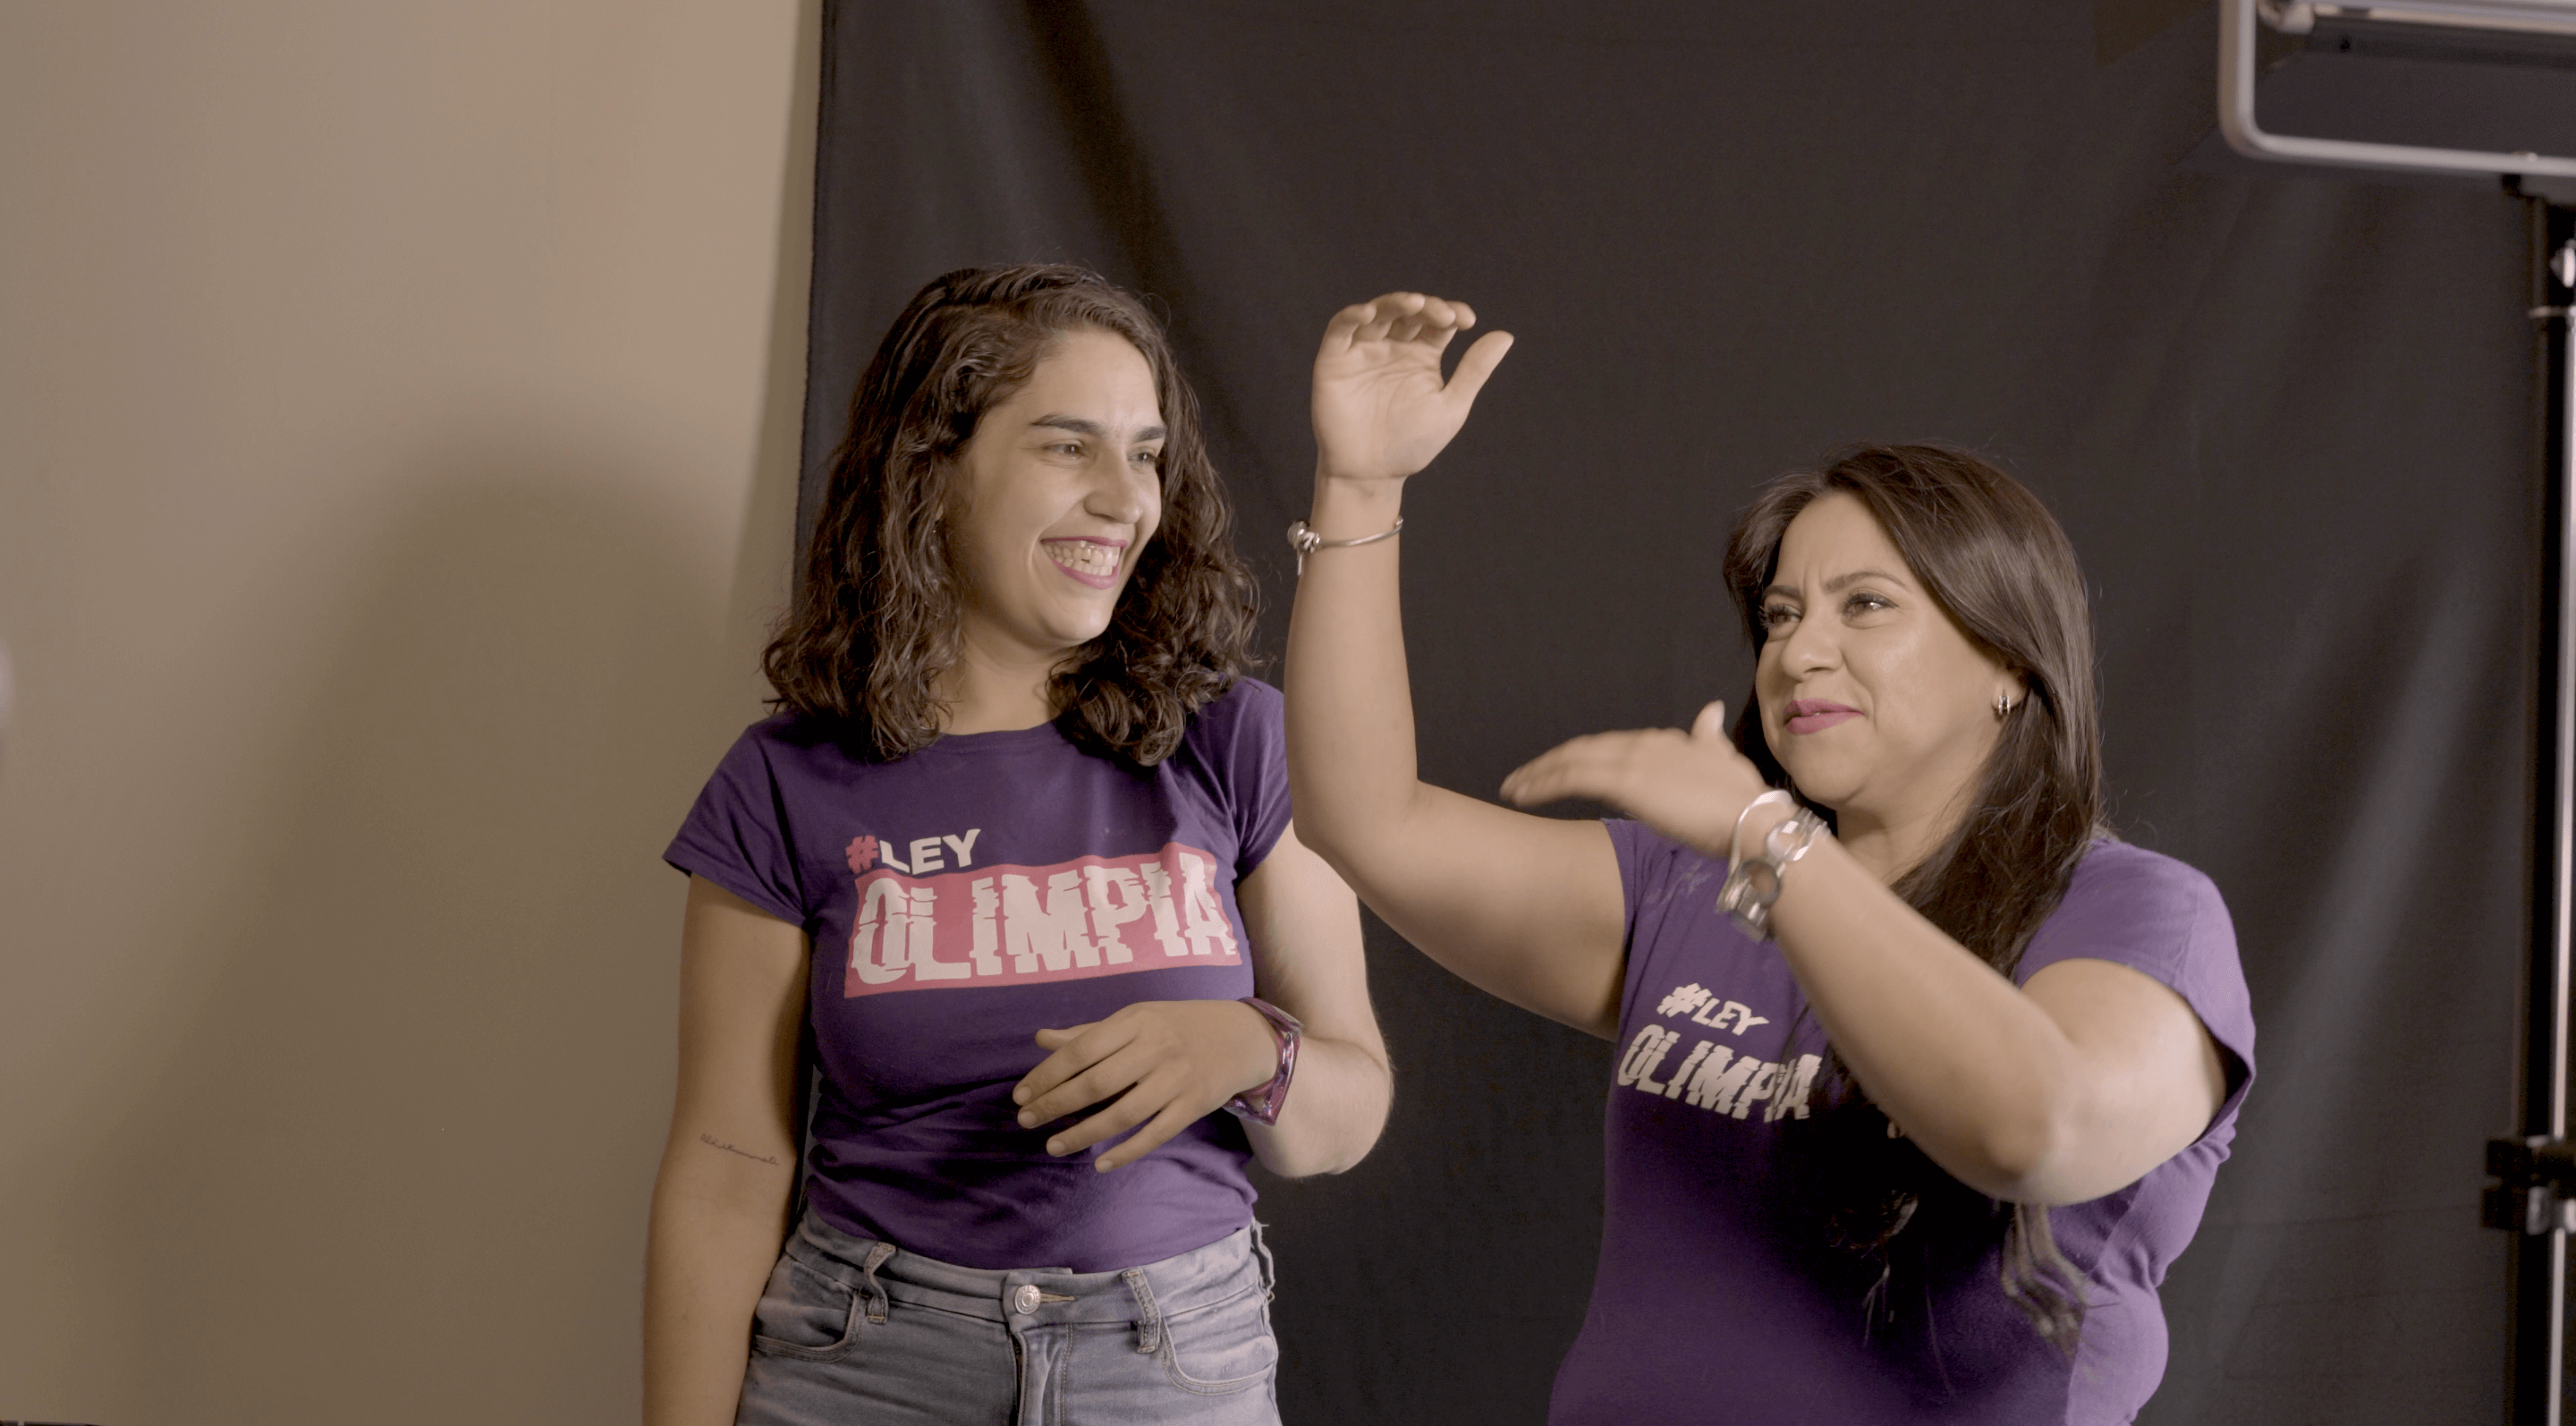 Olimpia Coral and Director Indira Cato laughing during a photoshoot. Both wear a purple "Olimpia Law" t-shirt.